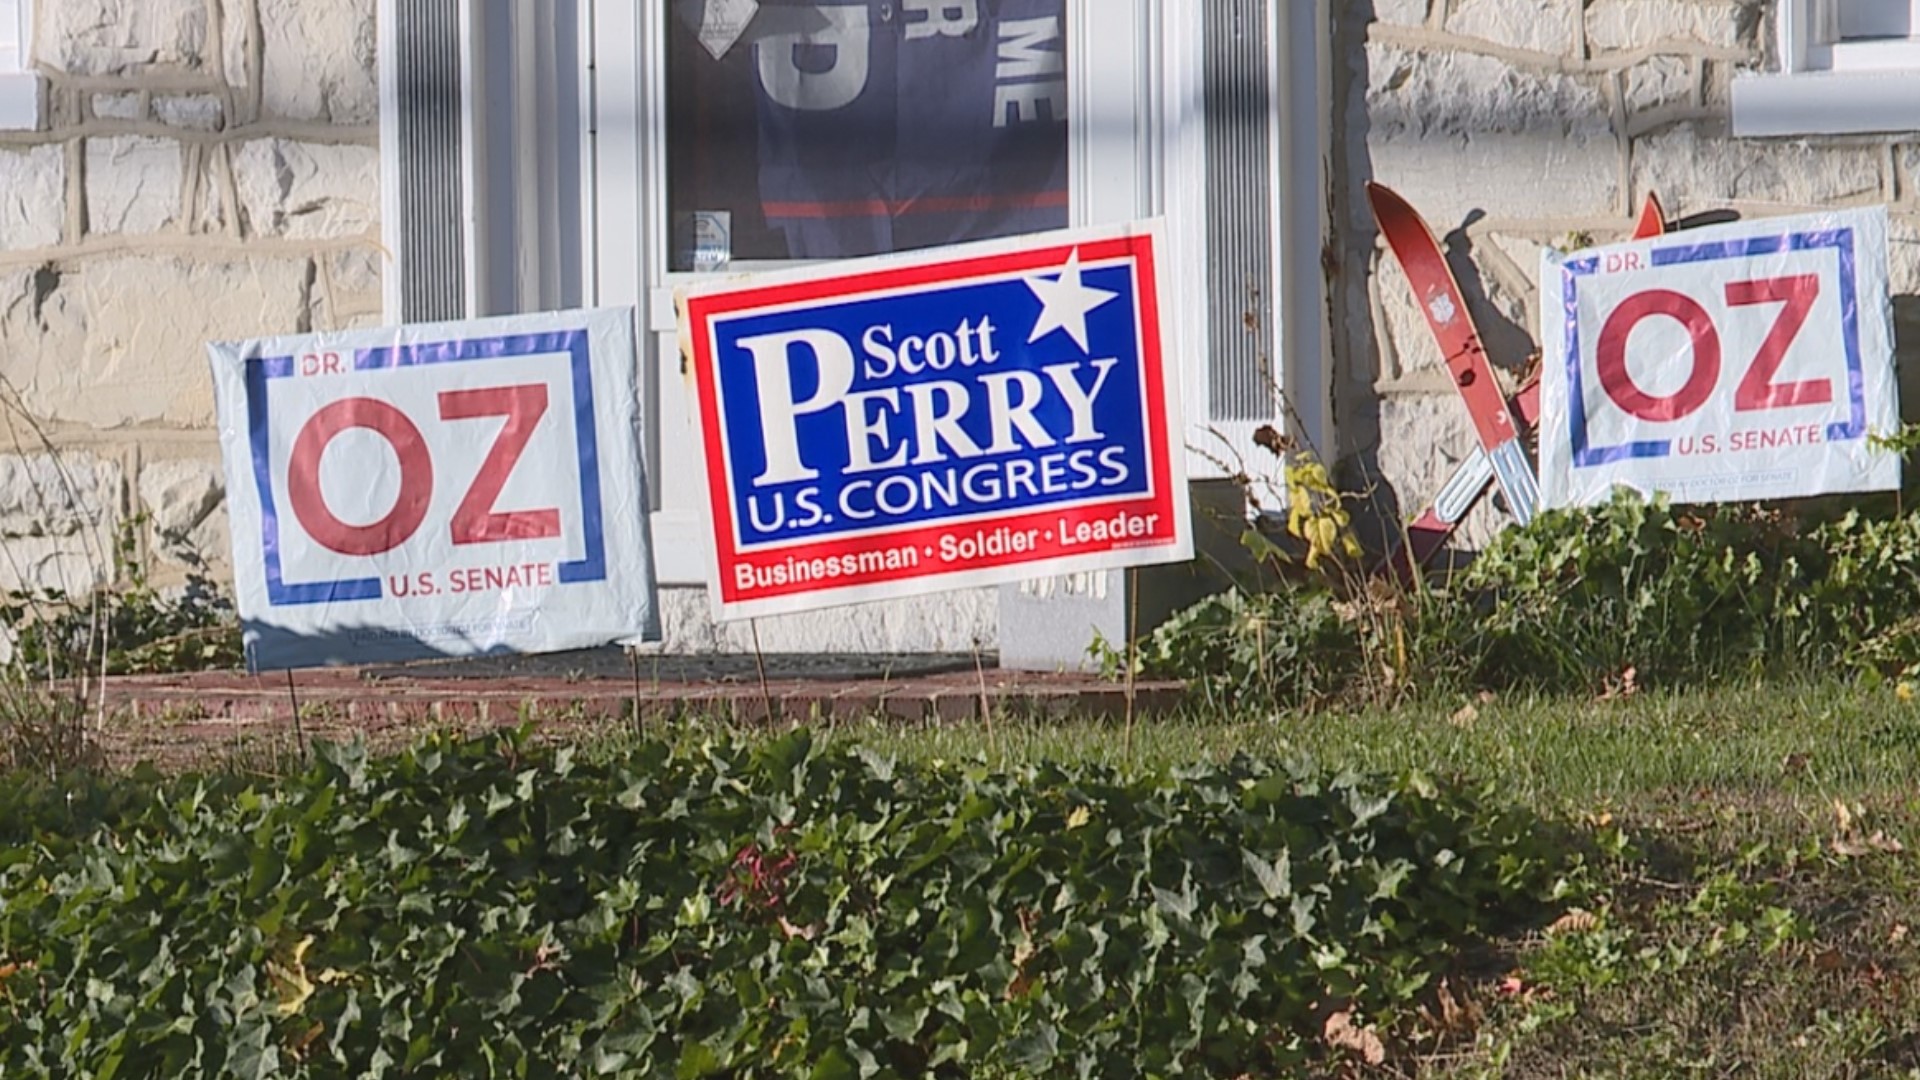 The ordinance limits people to displaying two political signs on their property, with violators facing a $1,000 fine.